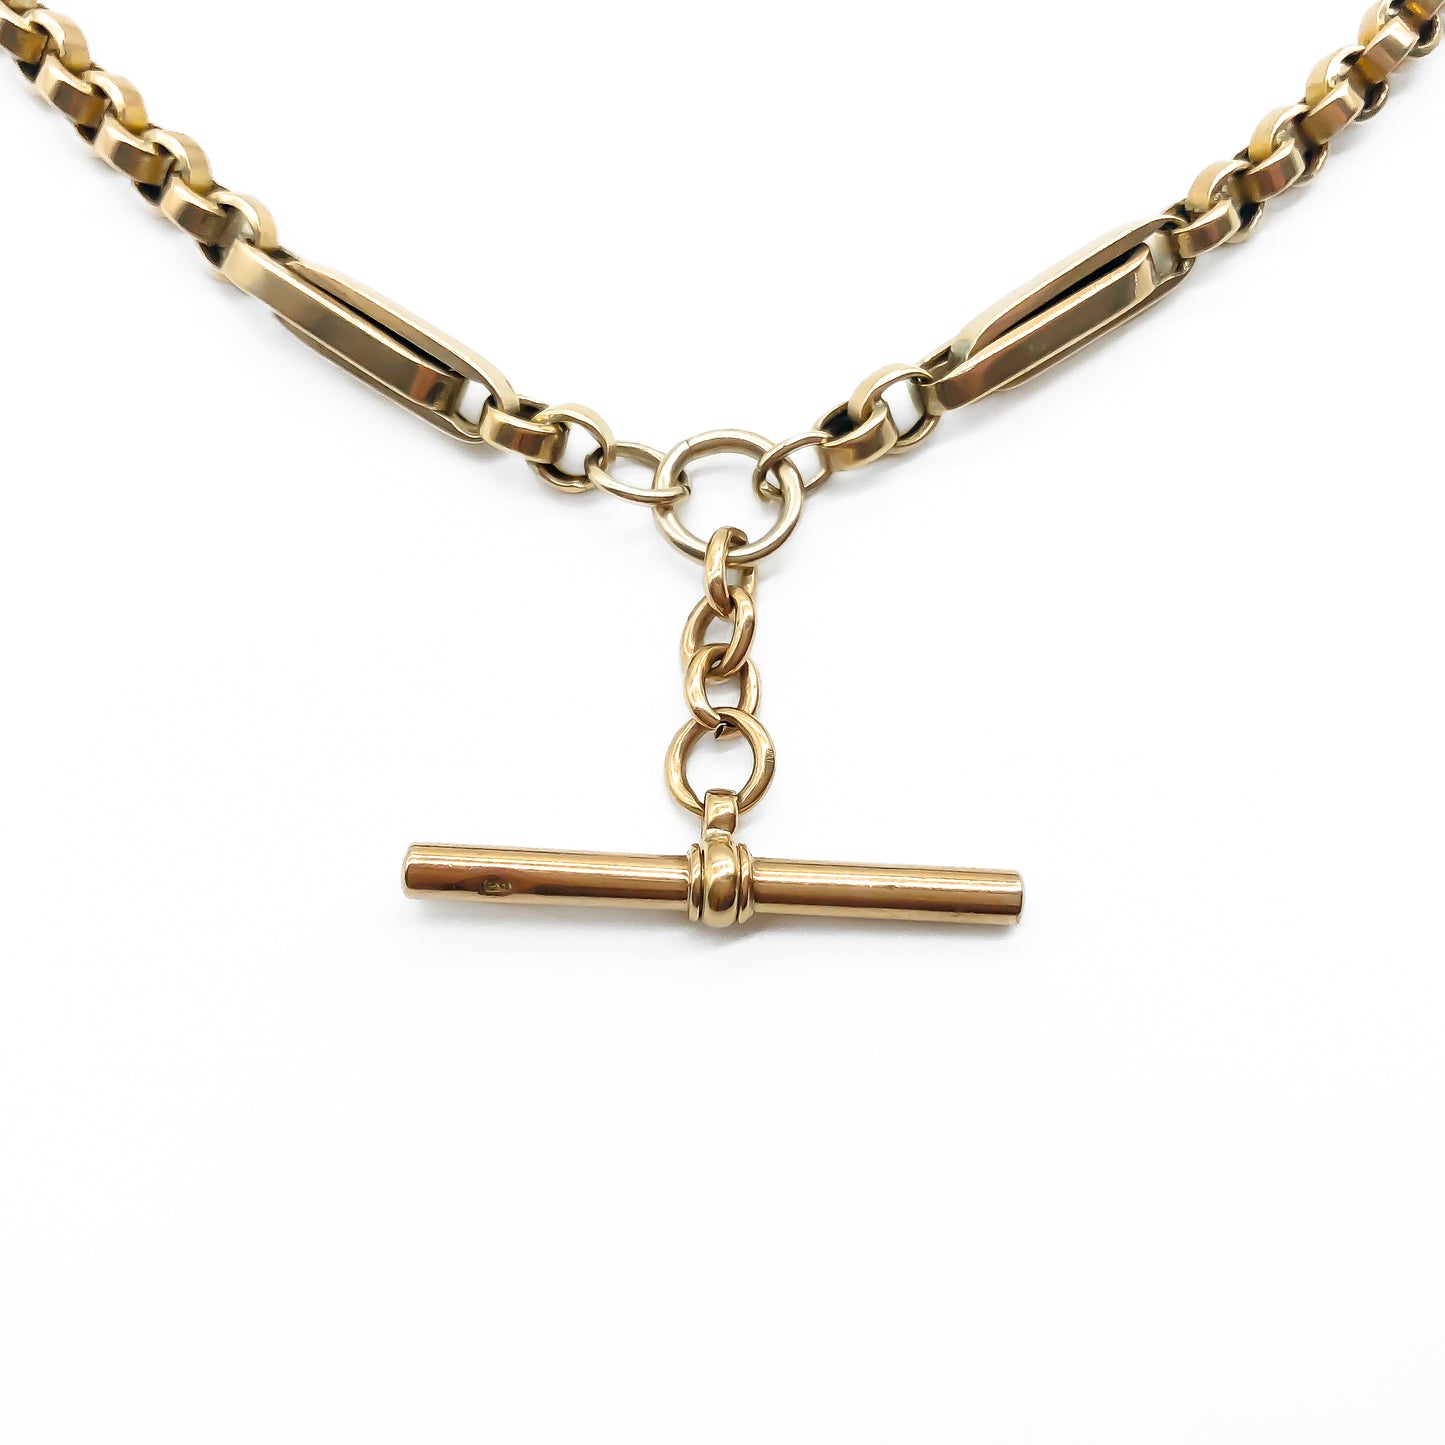 Stylish Victorian 9ct rose gold fancy link fob chain with a t-bar and two dog clips.